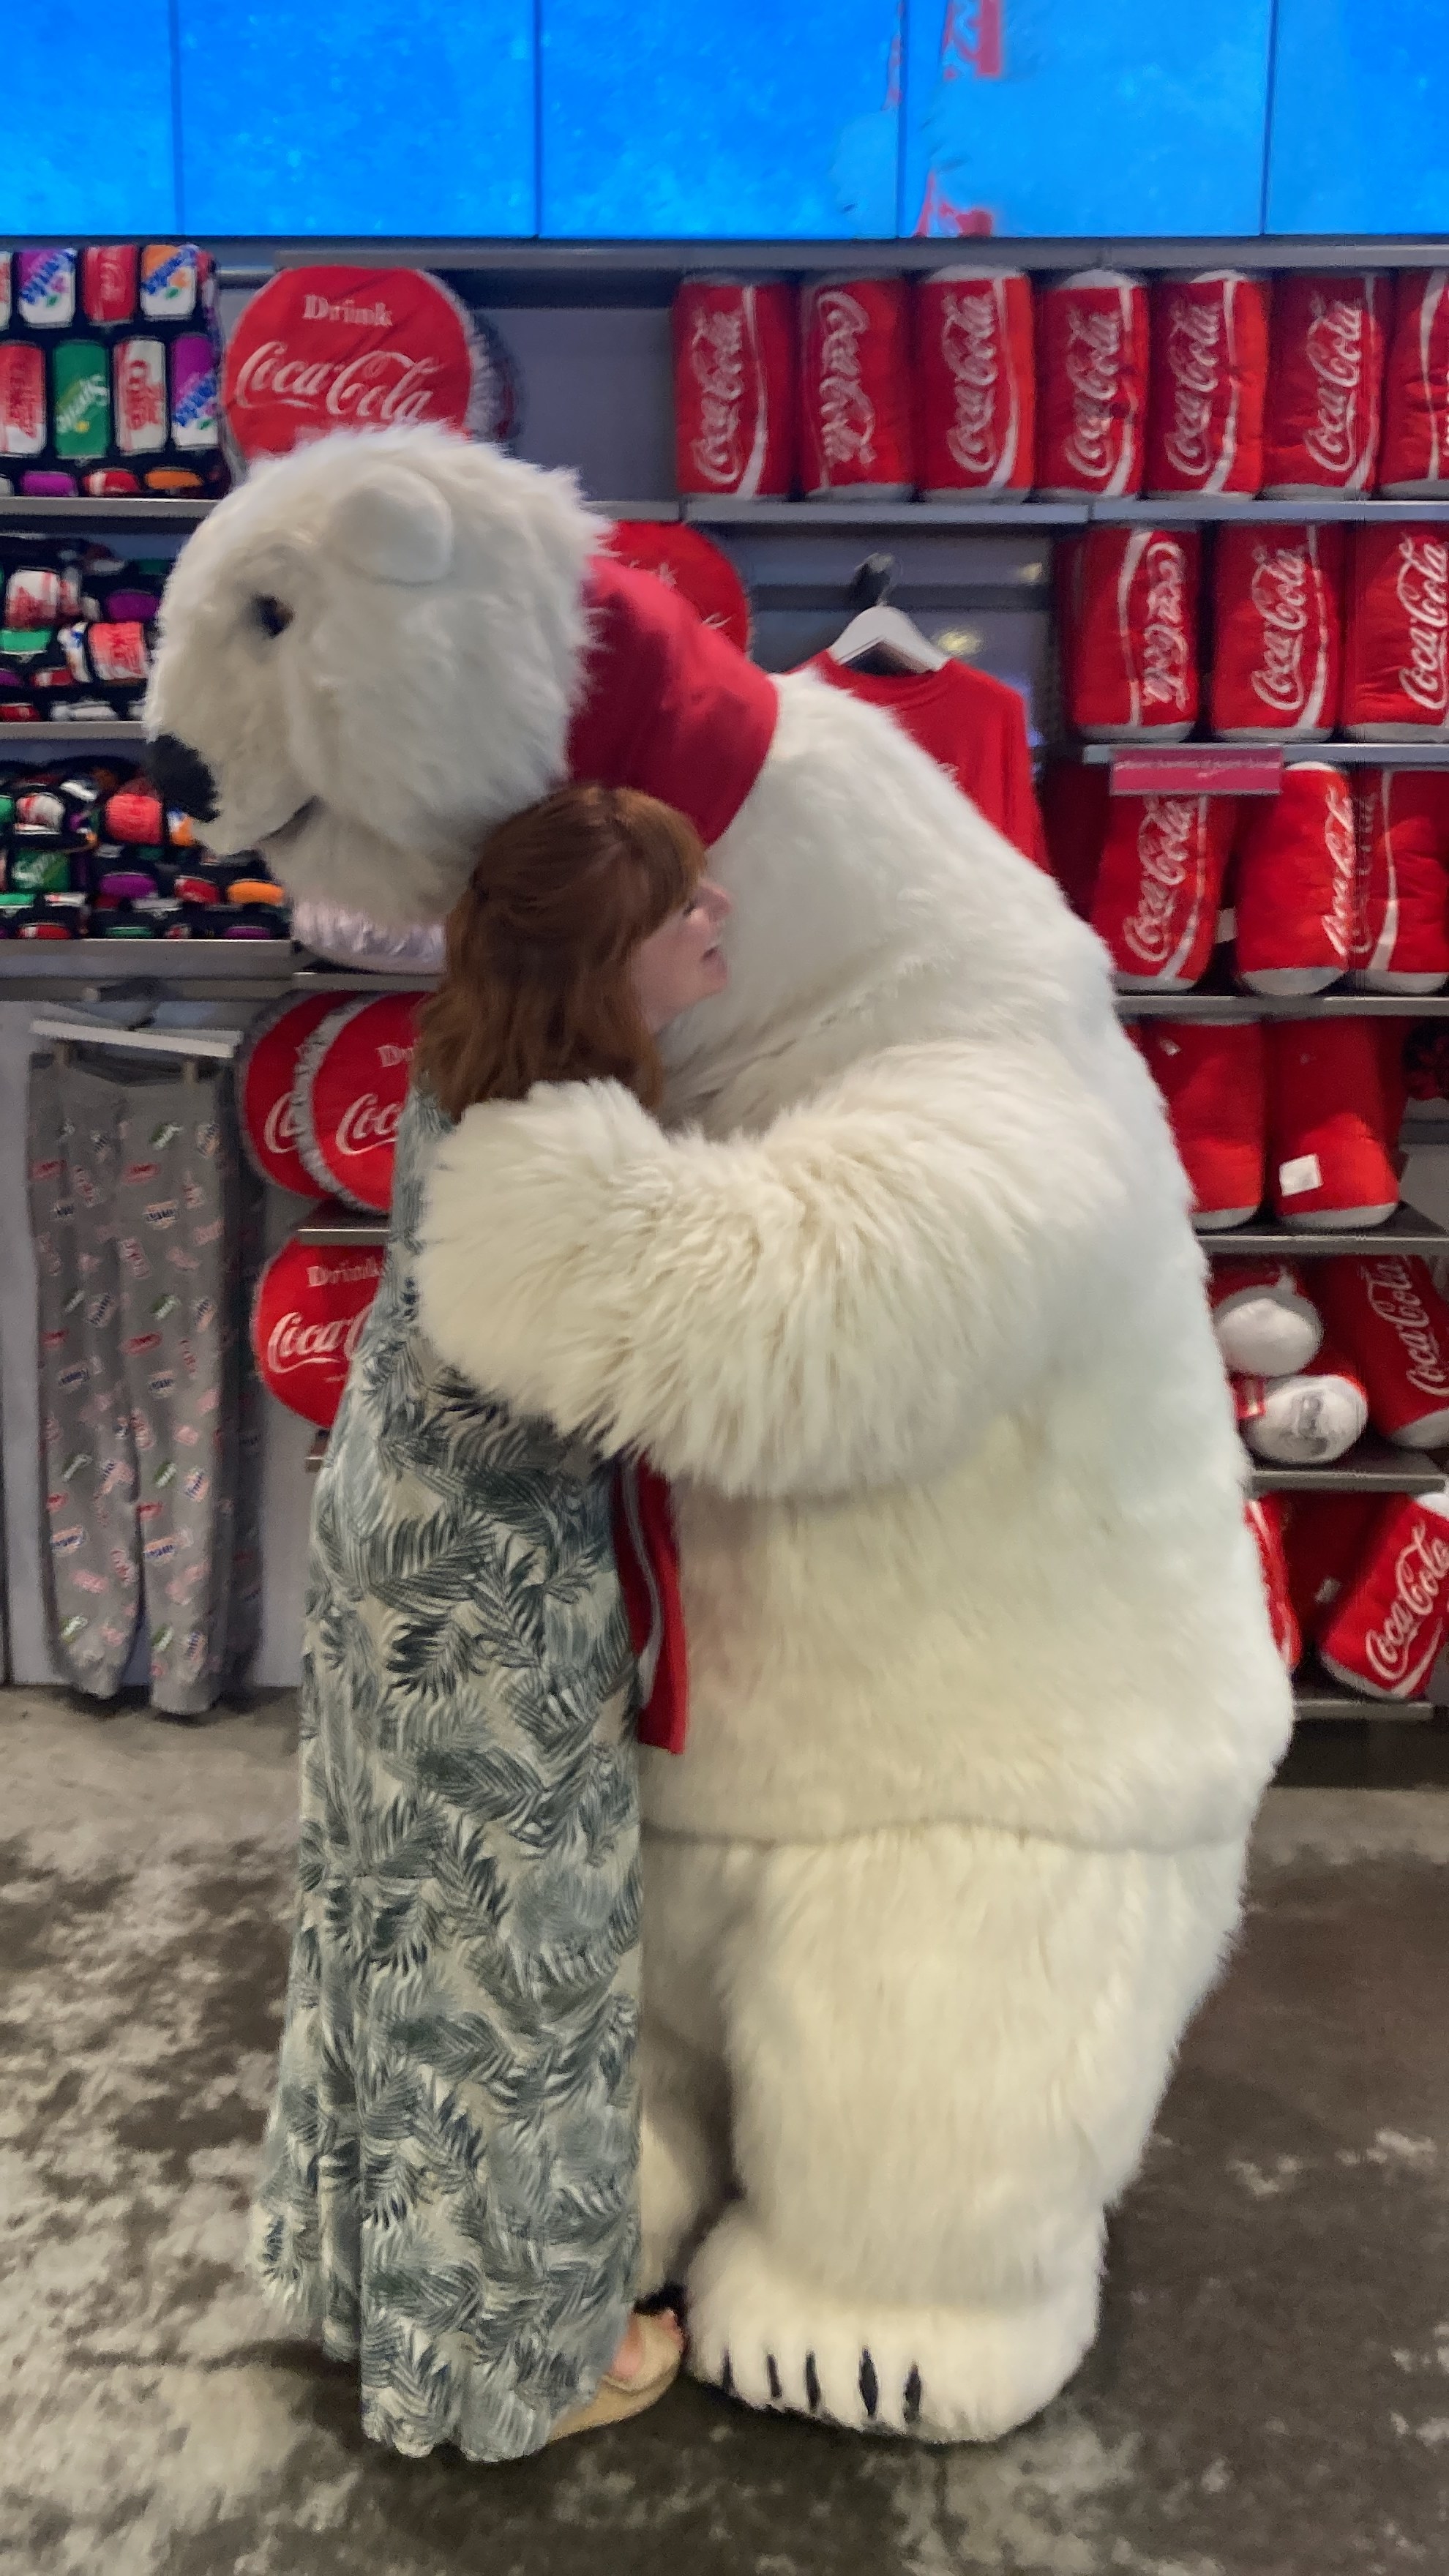 a person hugging the stuffed bear